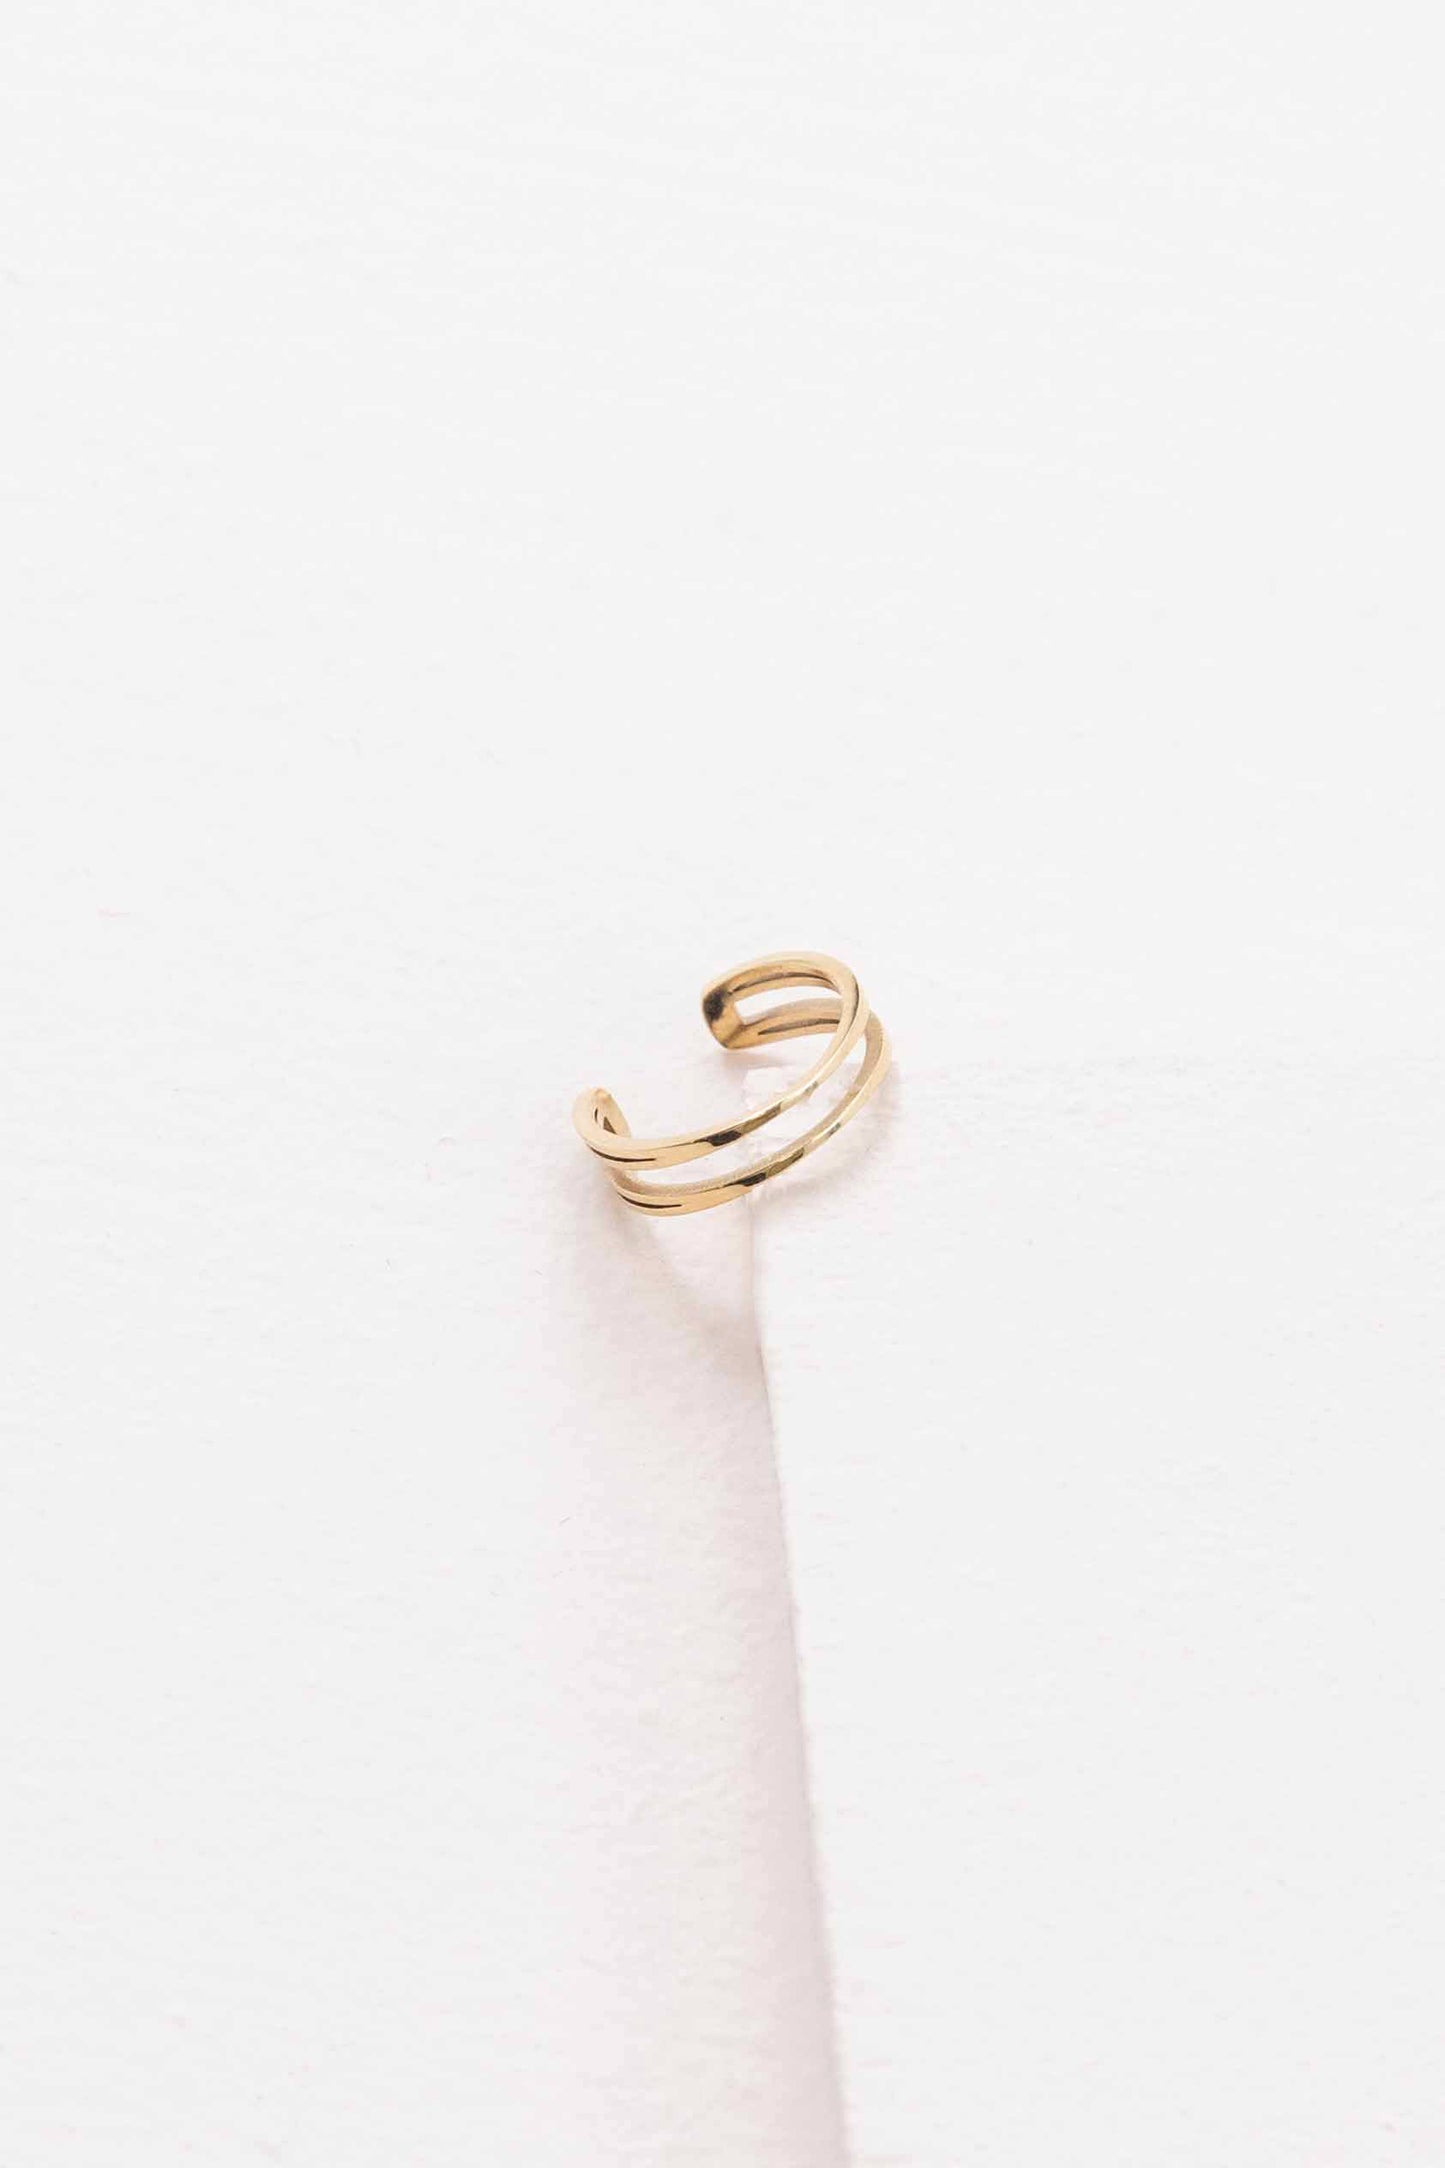 Double the Gold Ear Cuff (14K)